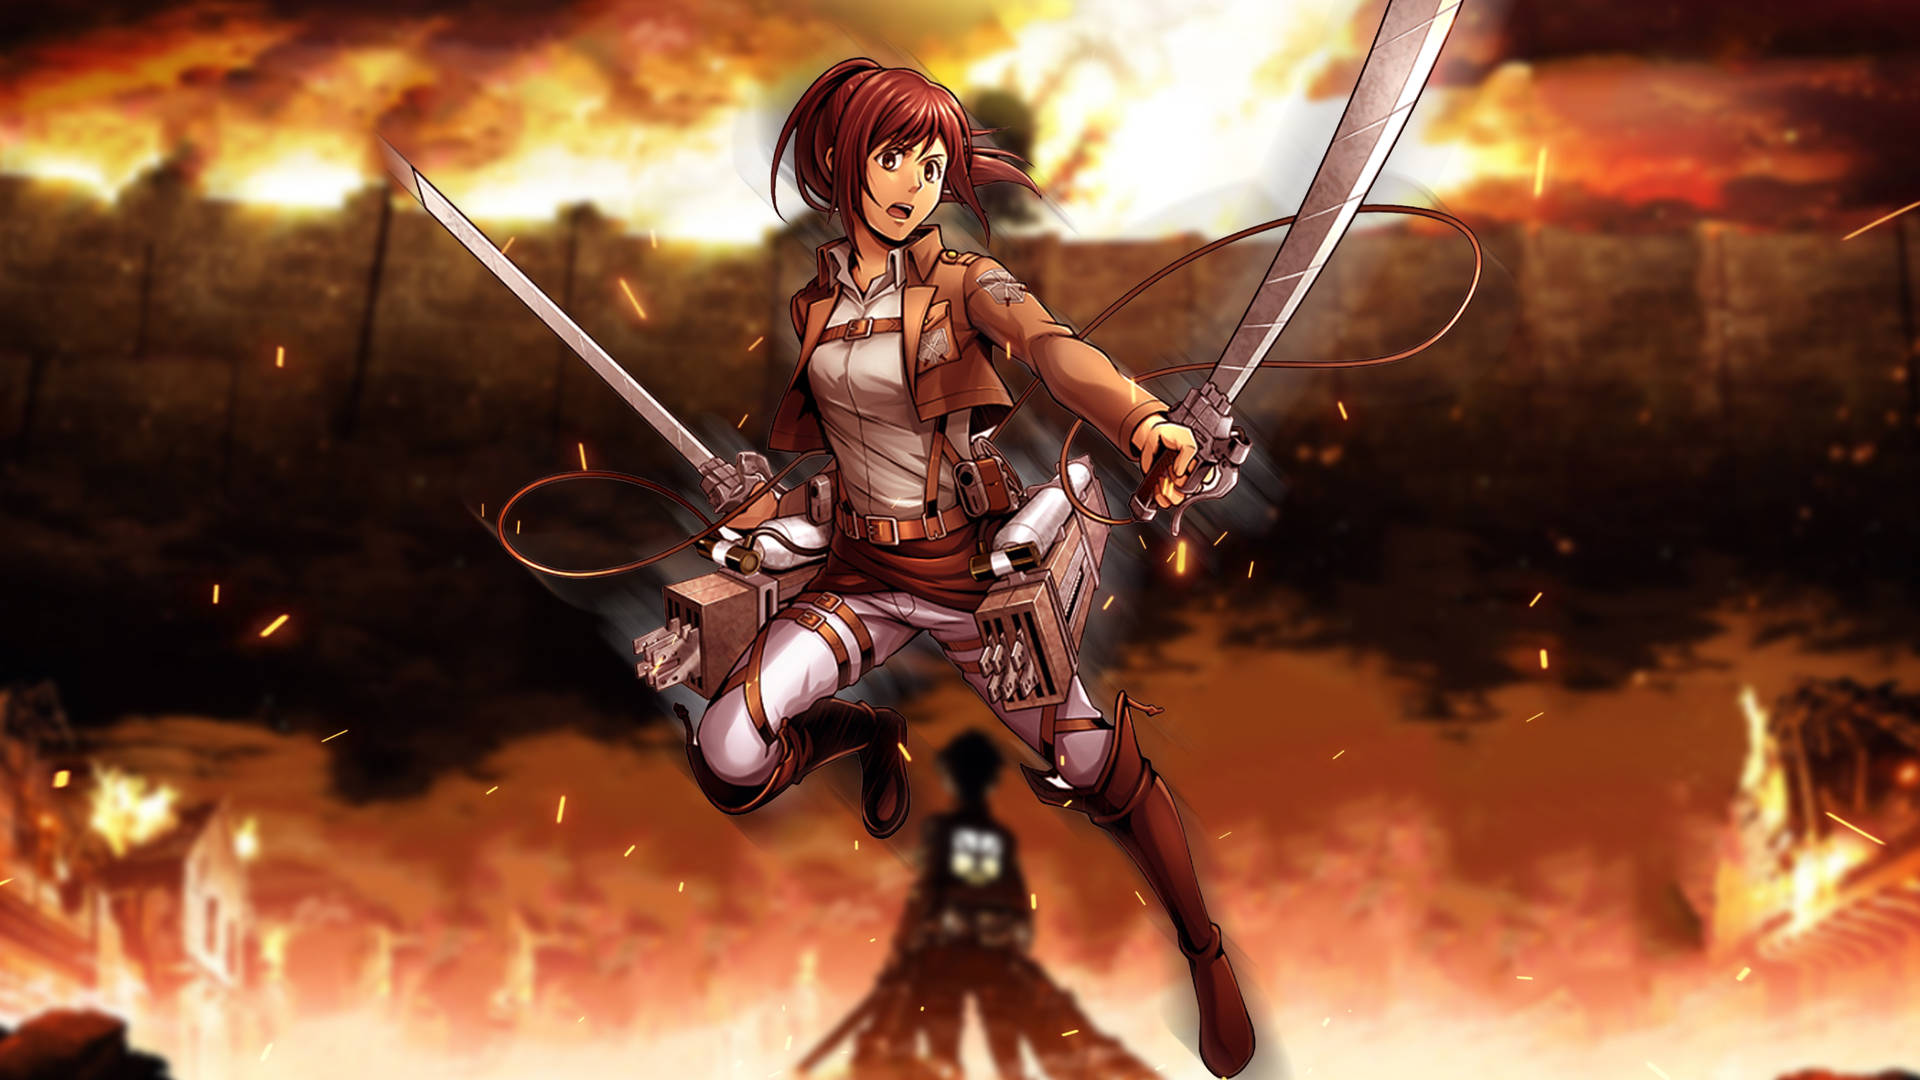 Top 999+ Attack On Titan 4k Wallpaper Full HD, 4K✅Free to Use